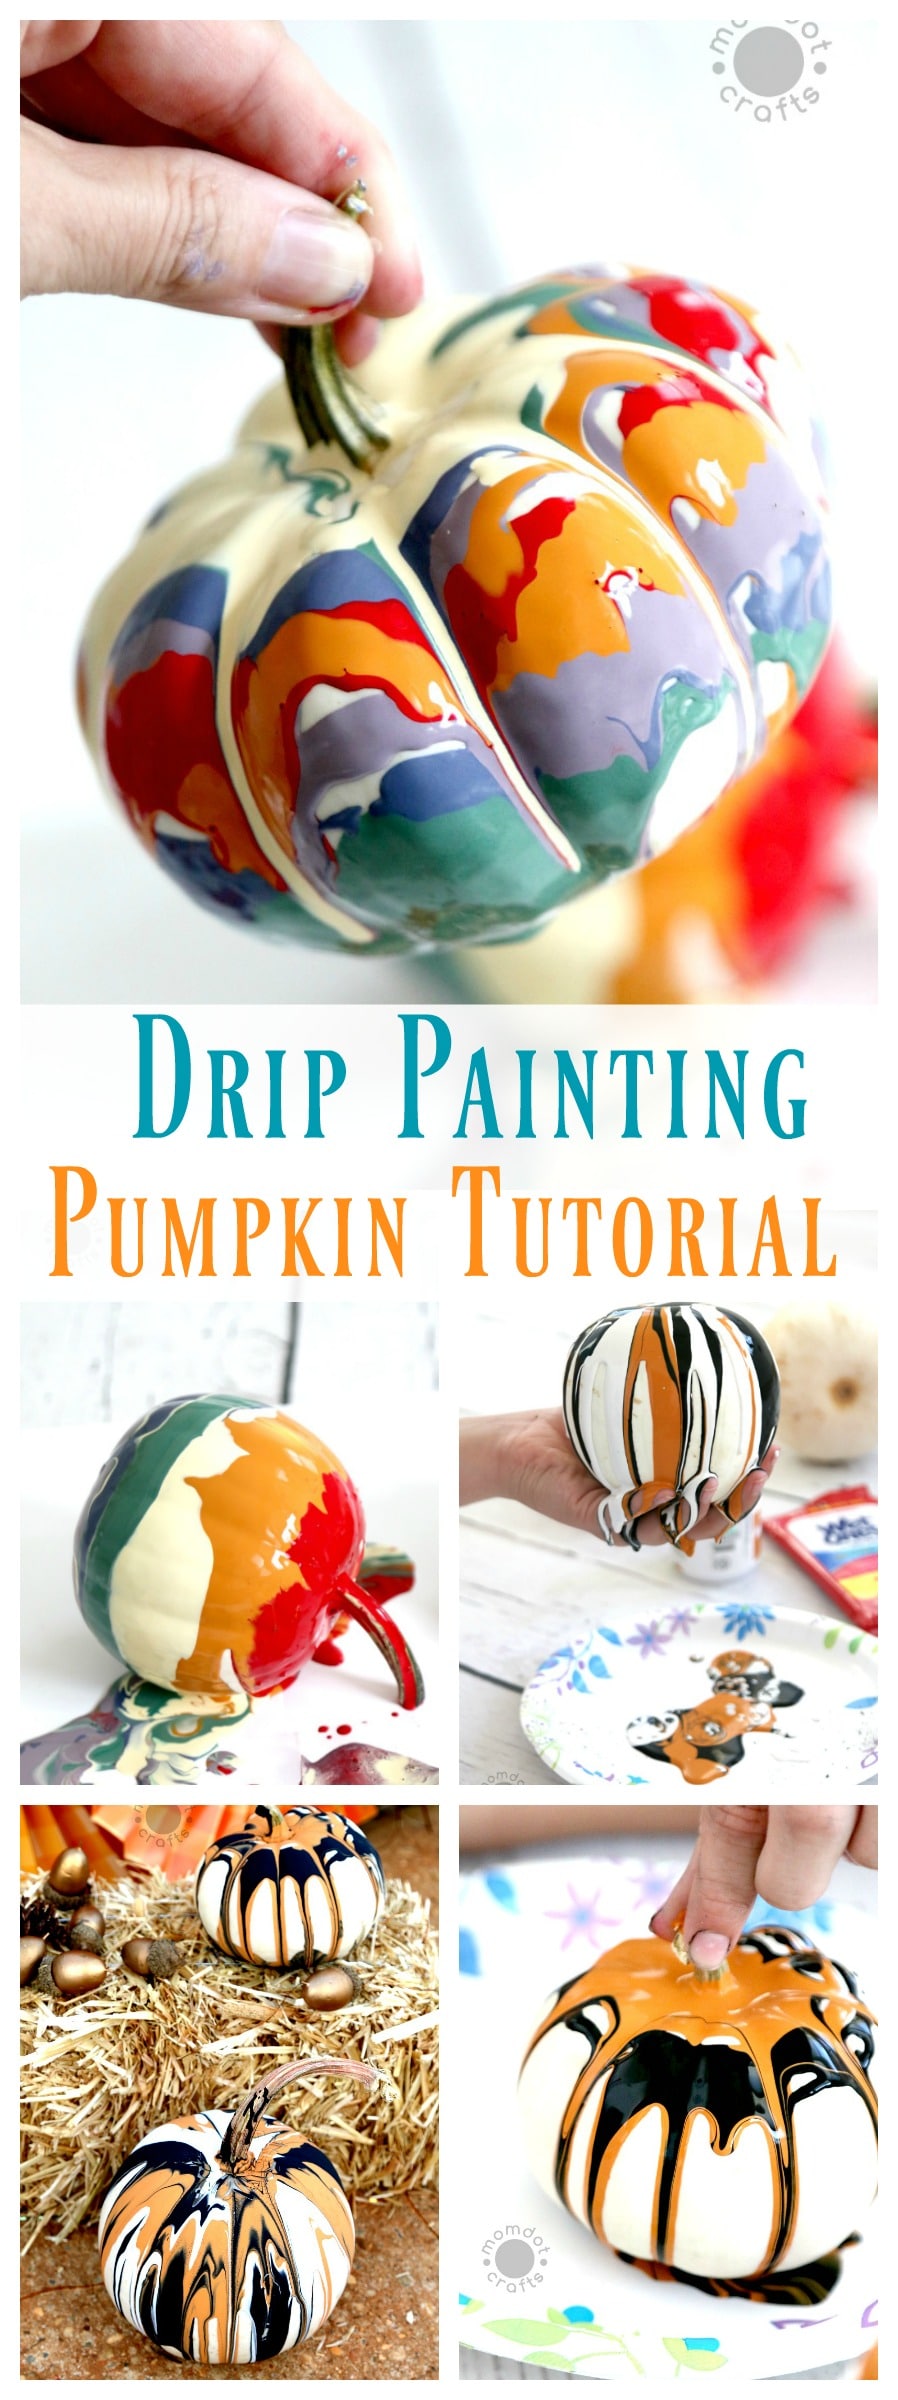 Drip Painting No Carve Pumpkin DIY for Halloween - Endless creativity and gorgeous!